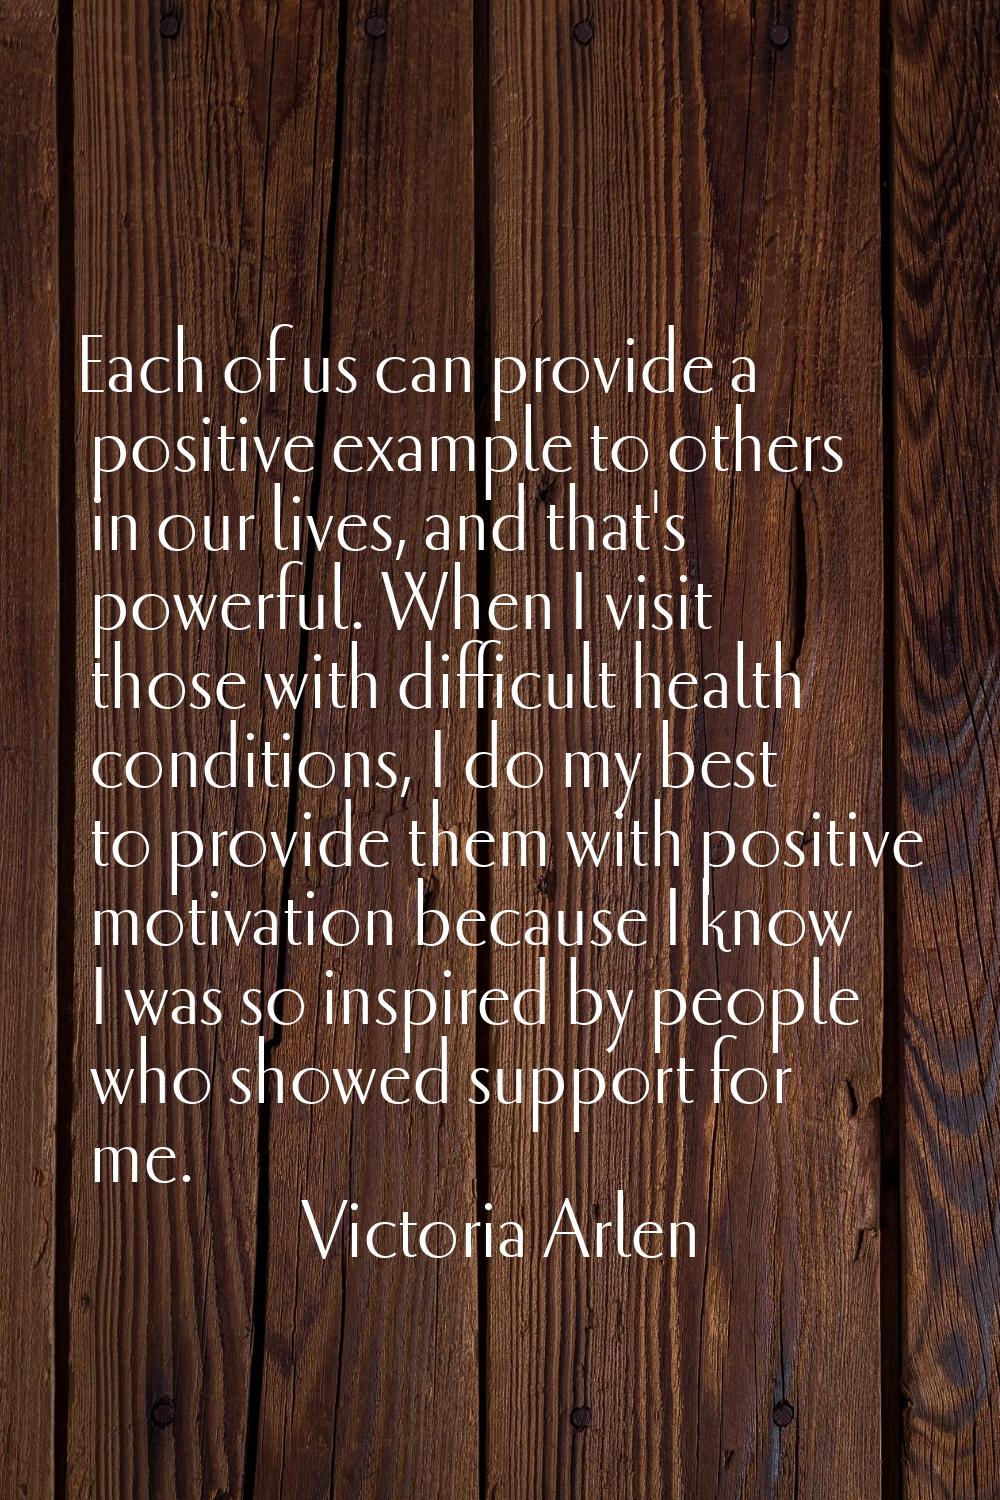 Each of us can provide a positive example to others in our lives, and that's powerful. When I visit